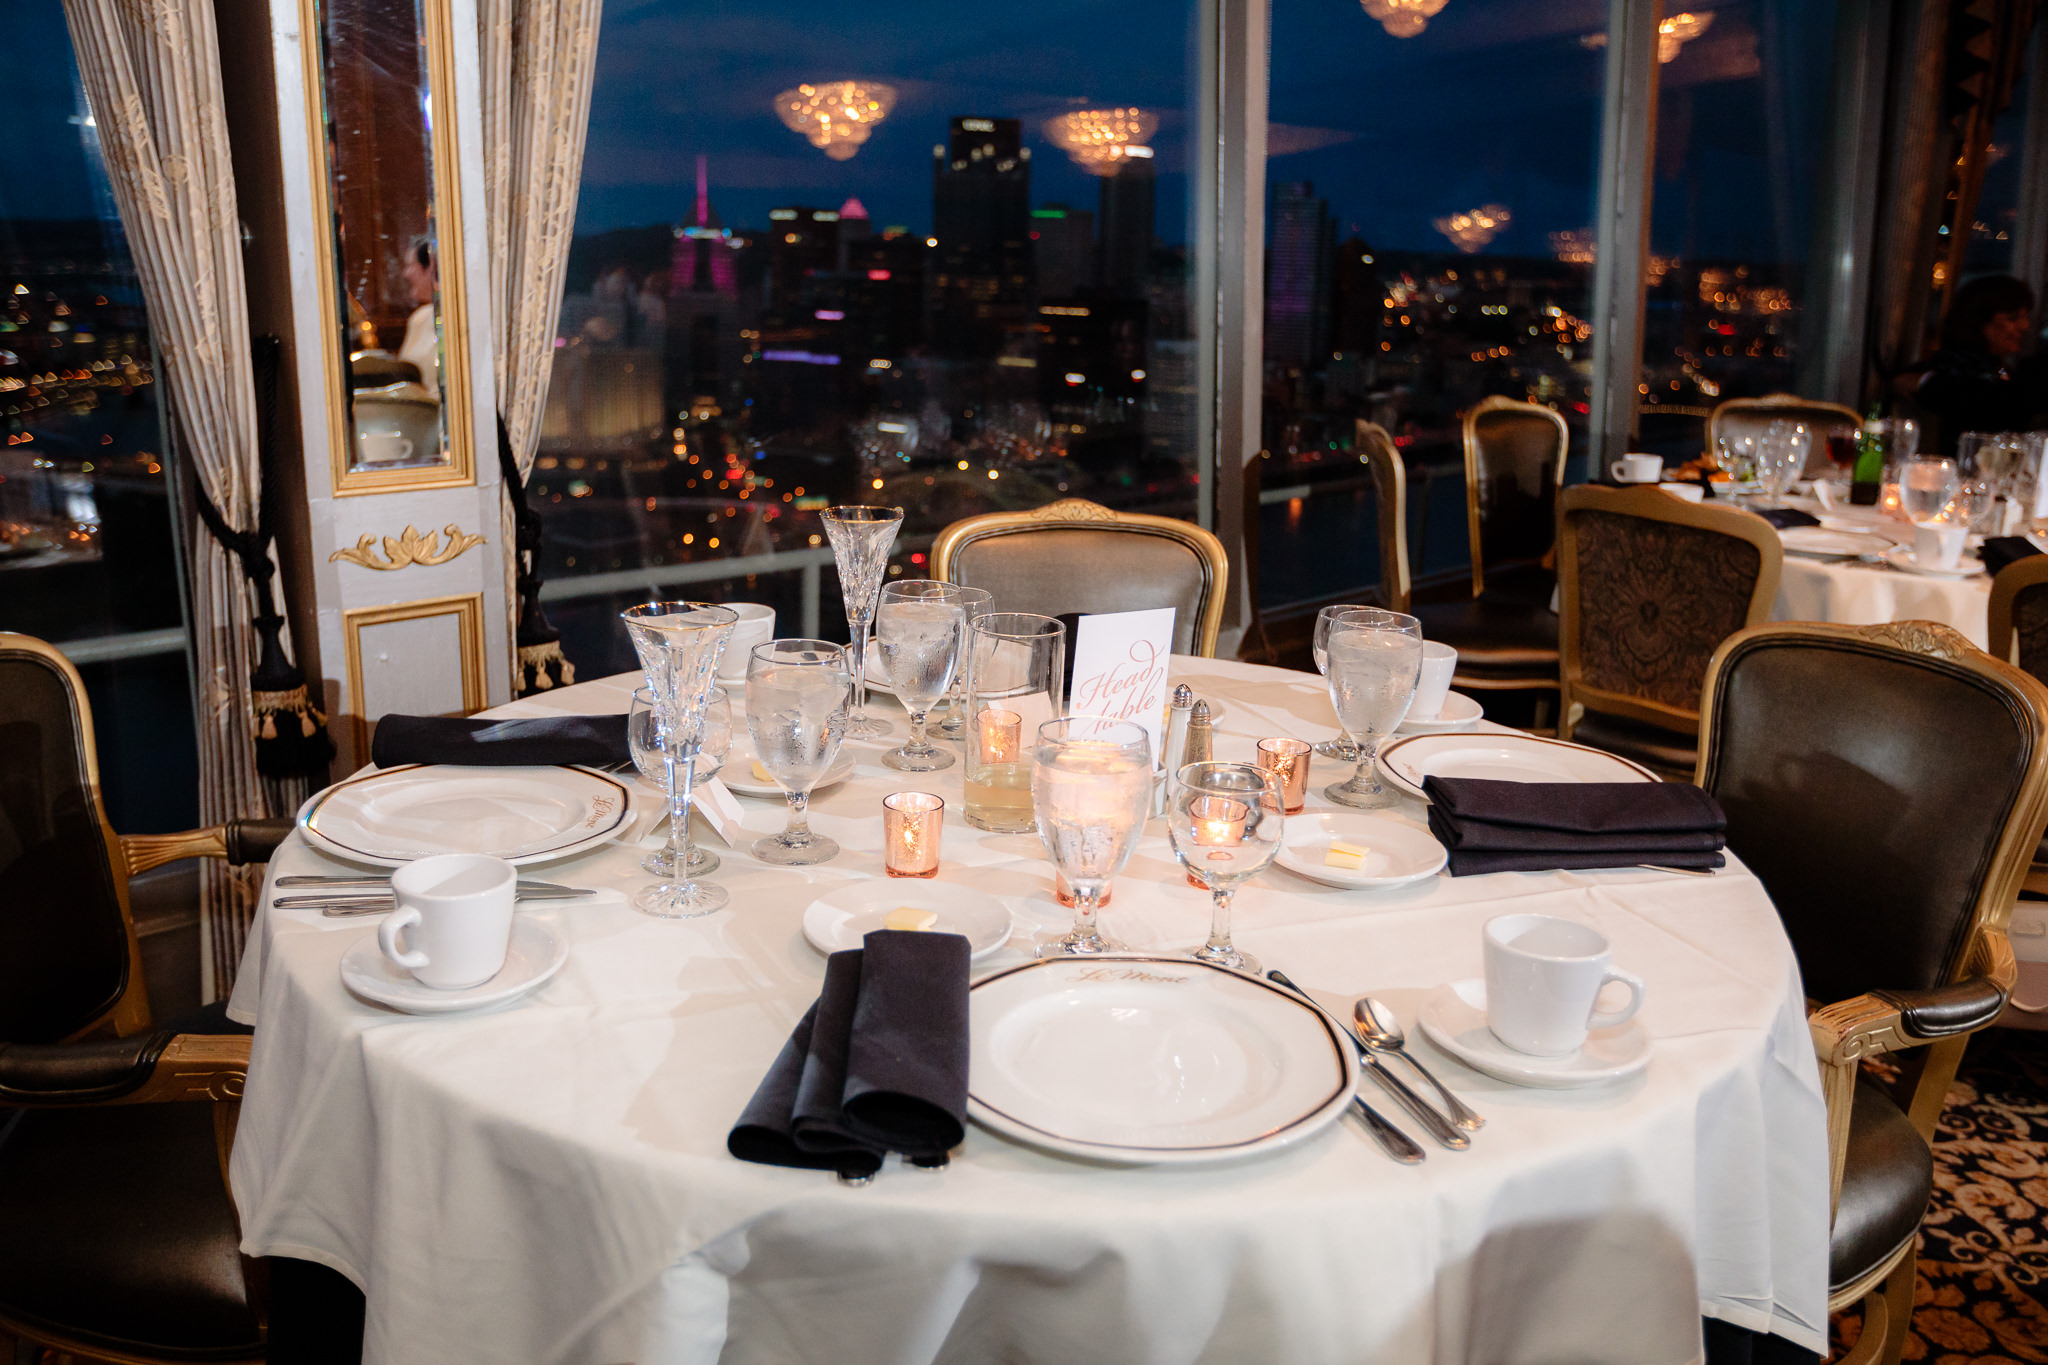 Head table overlooking the city at a LeMont wedding